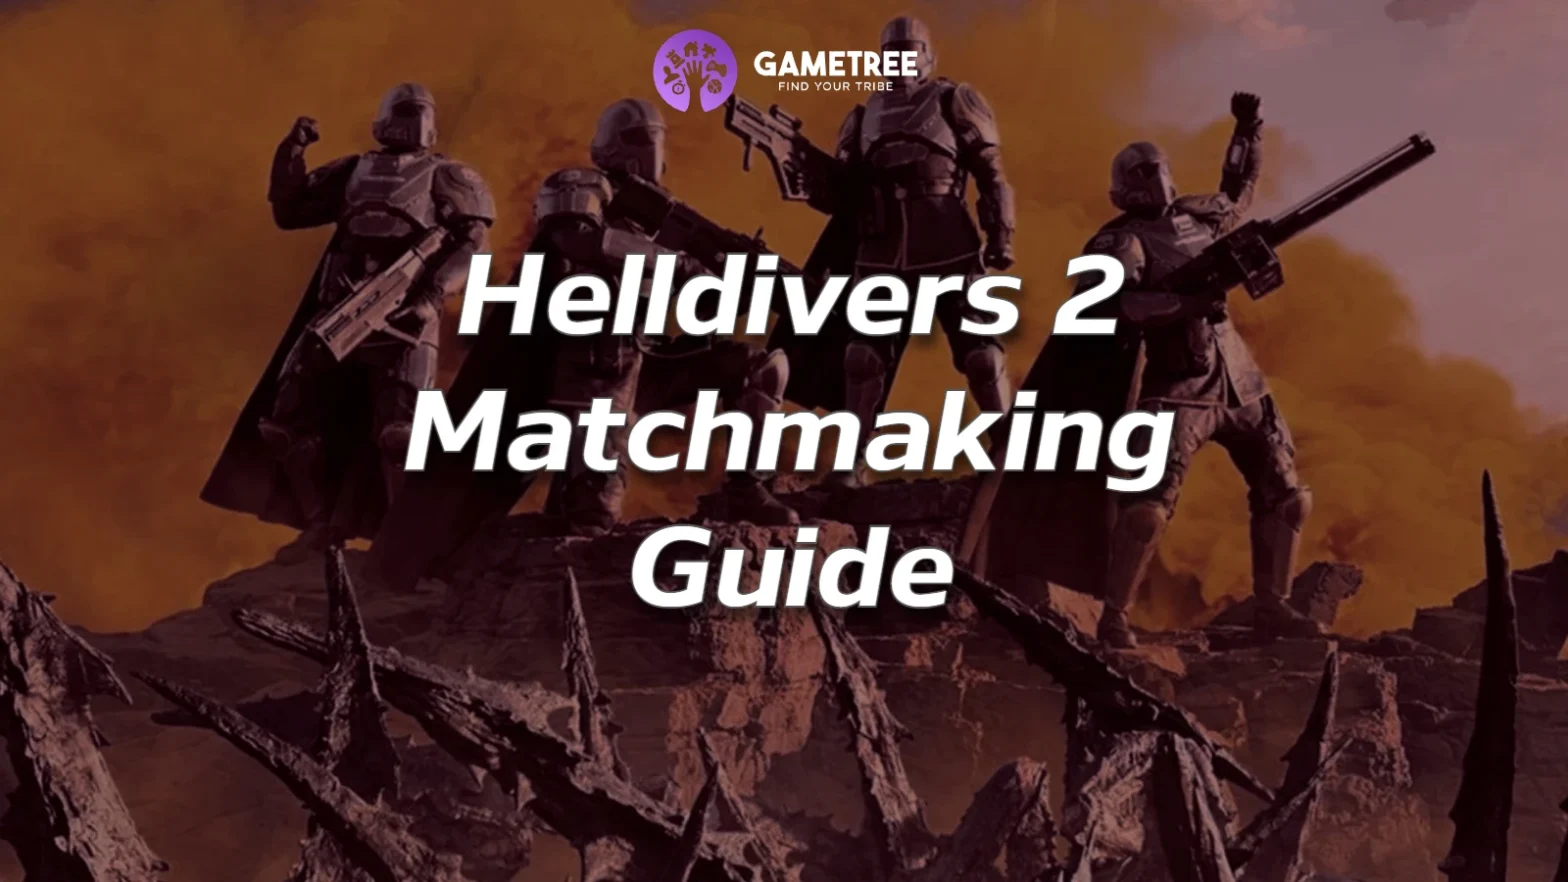 Helldivers 2 does have matchmaking, allowing players to find and join matches easily. This feature enhances the gaming experience by facilitating multiplayer interactions.